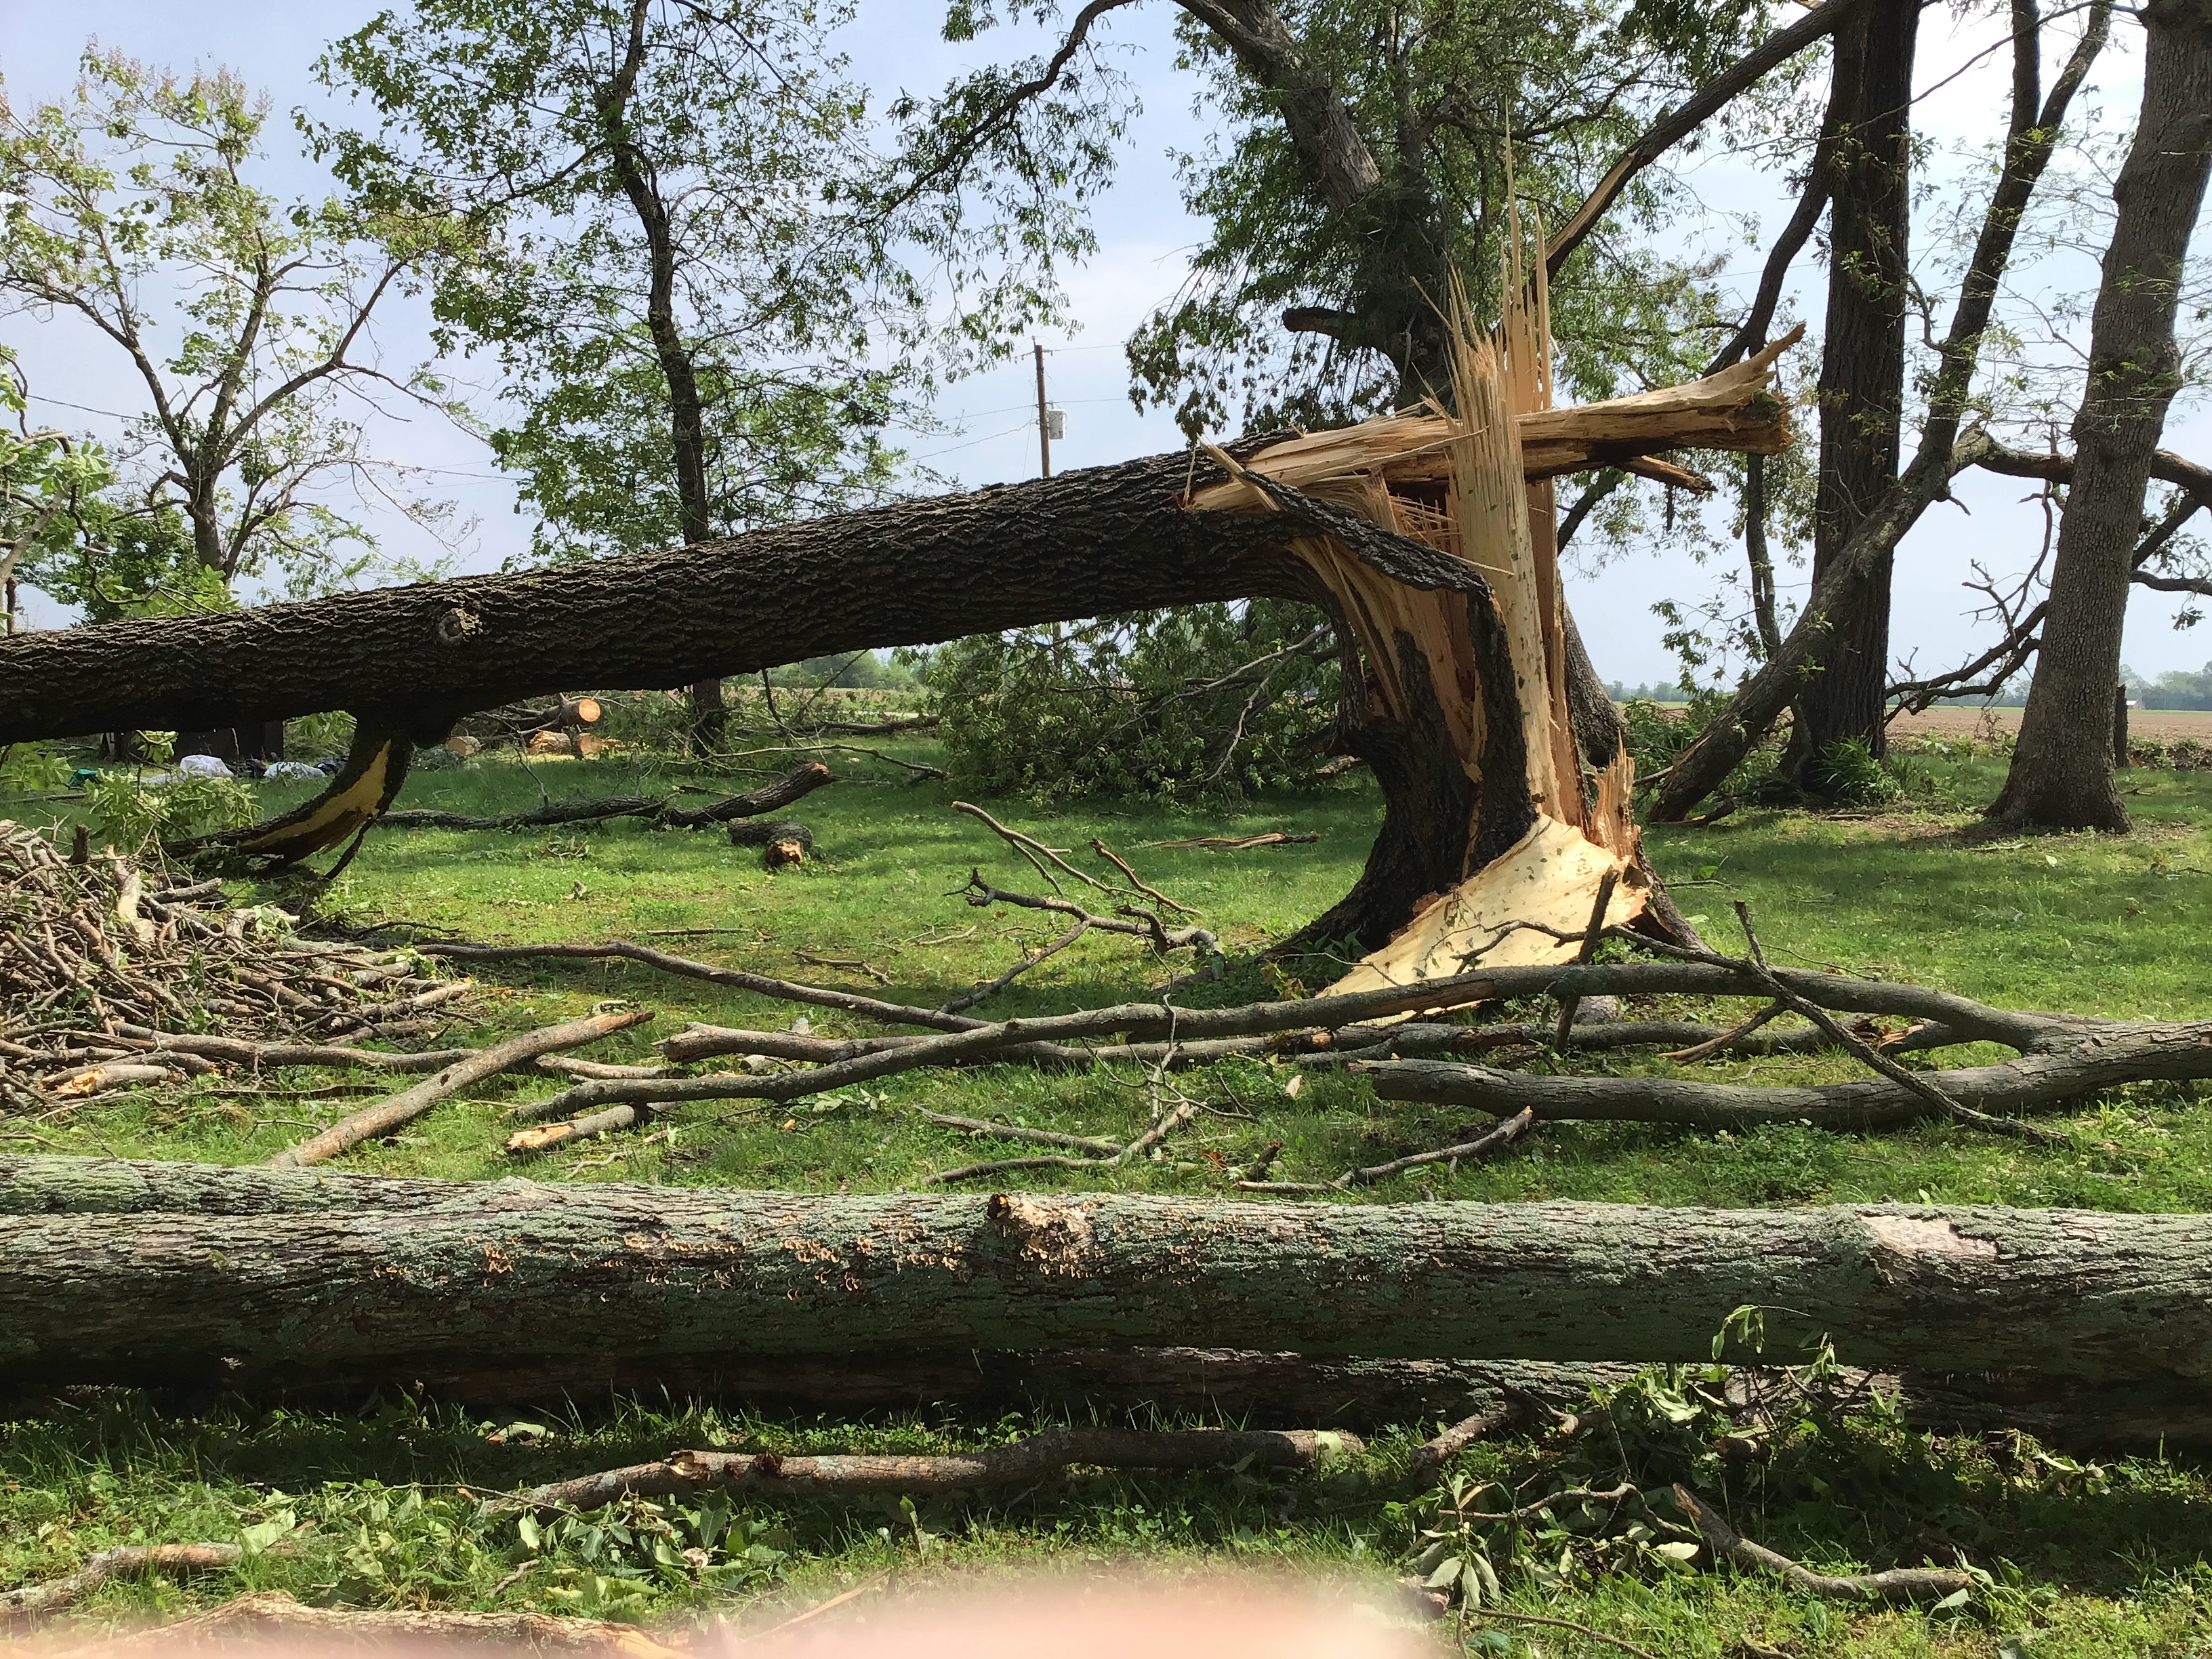 Trees were snapped at the trunk near their bases.